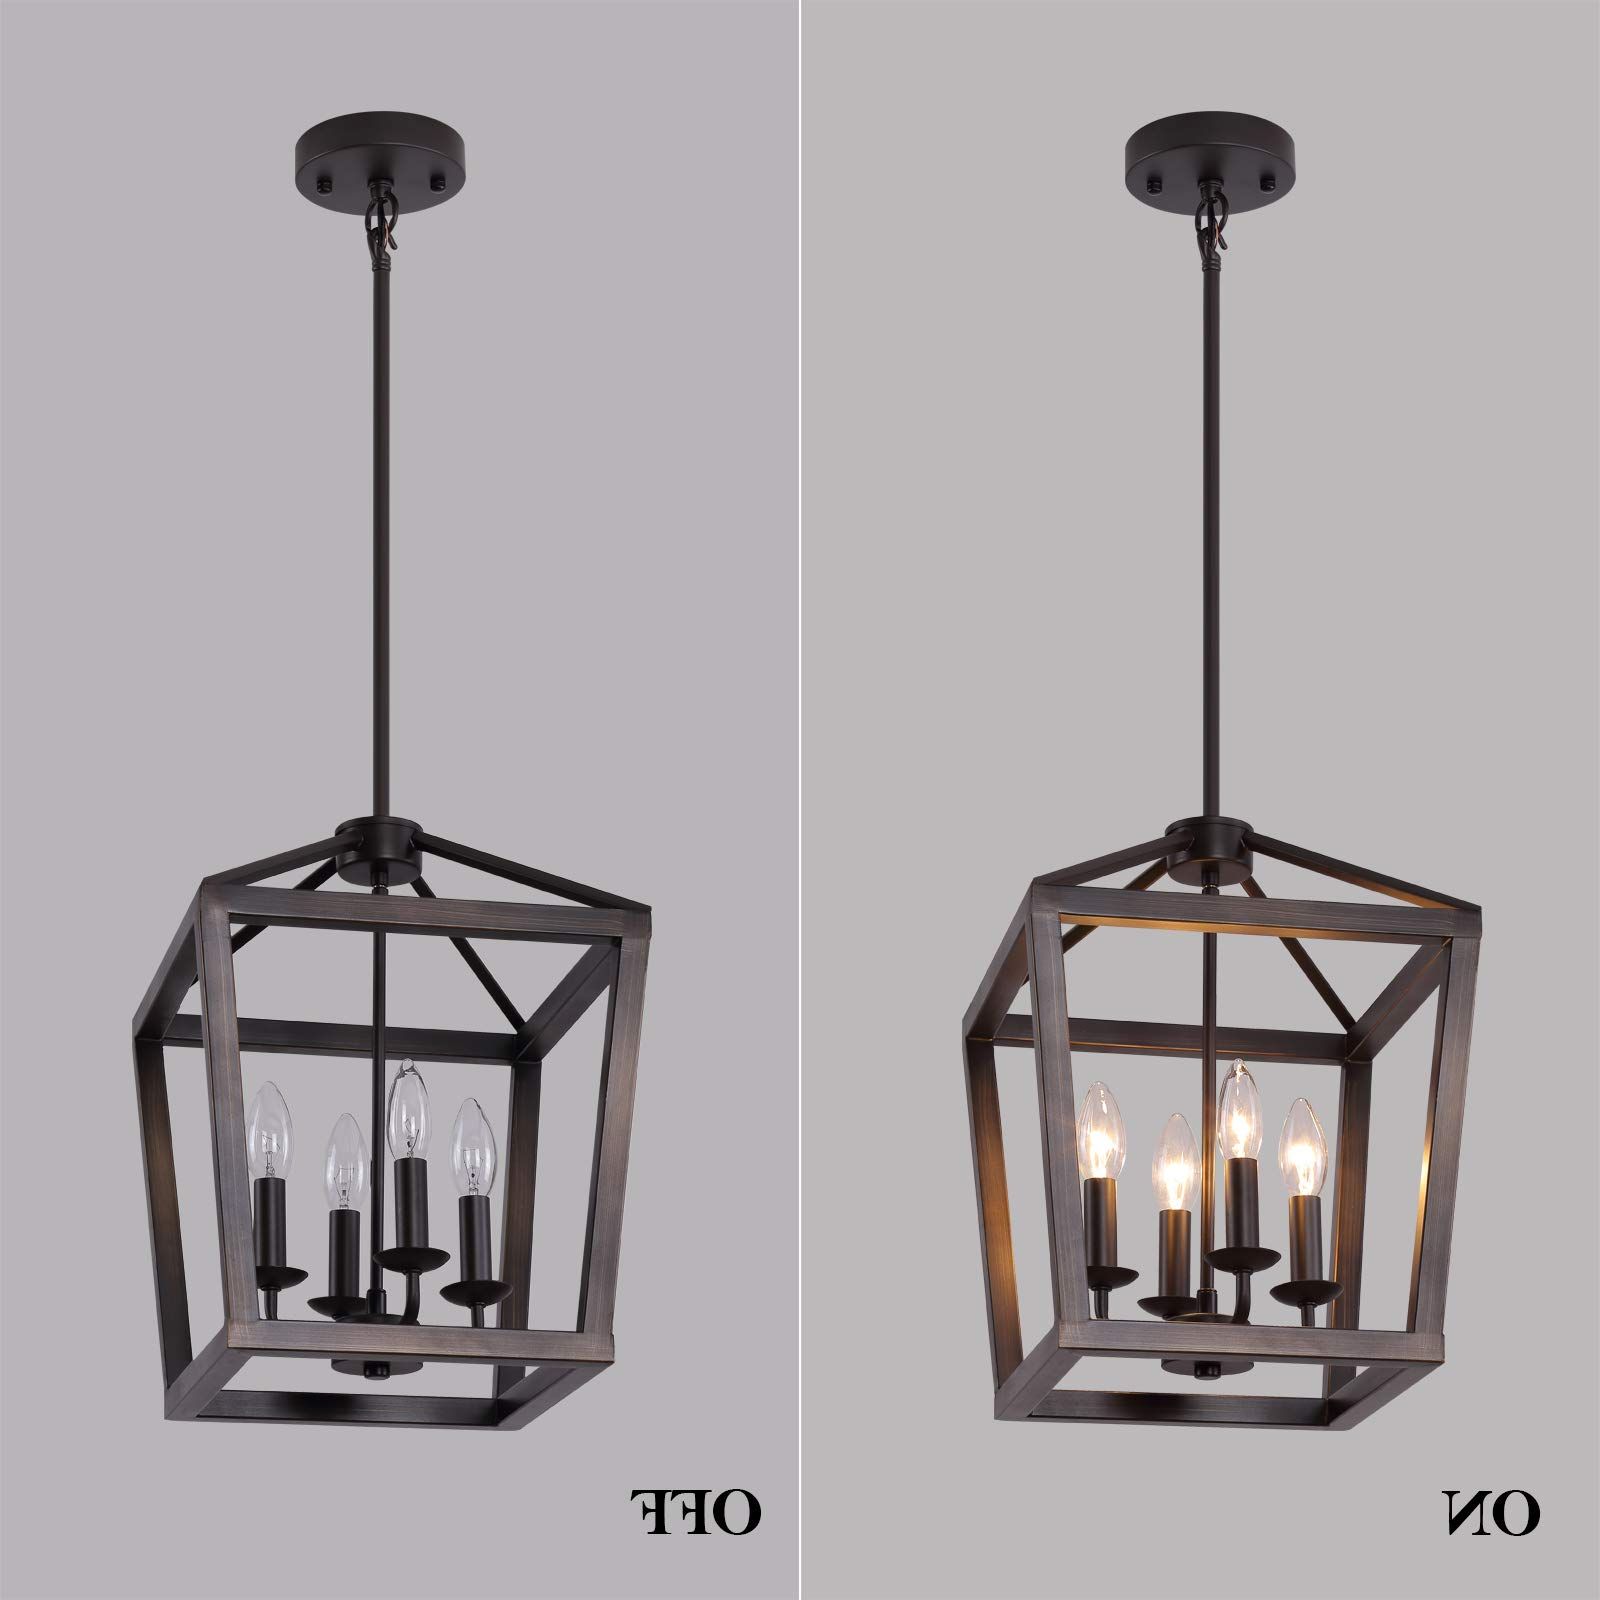 Fashionable Sullivan Rustic Blue Lantern Chandeliers In Amazon: Q&s Farmhouse Chandelier Light Fixture,vintage Rustic Pendant  Lighting,square Lantern,orb And Bronze Rubbed Metal Hanging Lighting  Fixtures For Dining Room Kitchen Foyer Entryway 4 Lights Ul Listed : Home &  Kitchen (View 11 of 15)